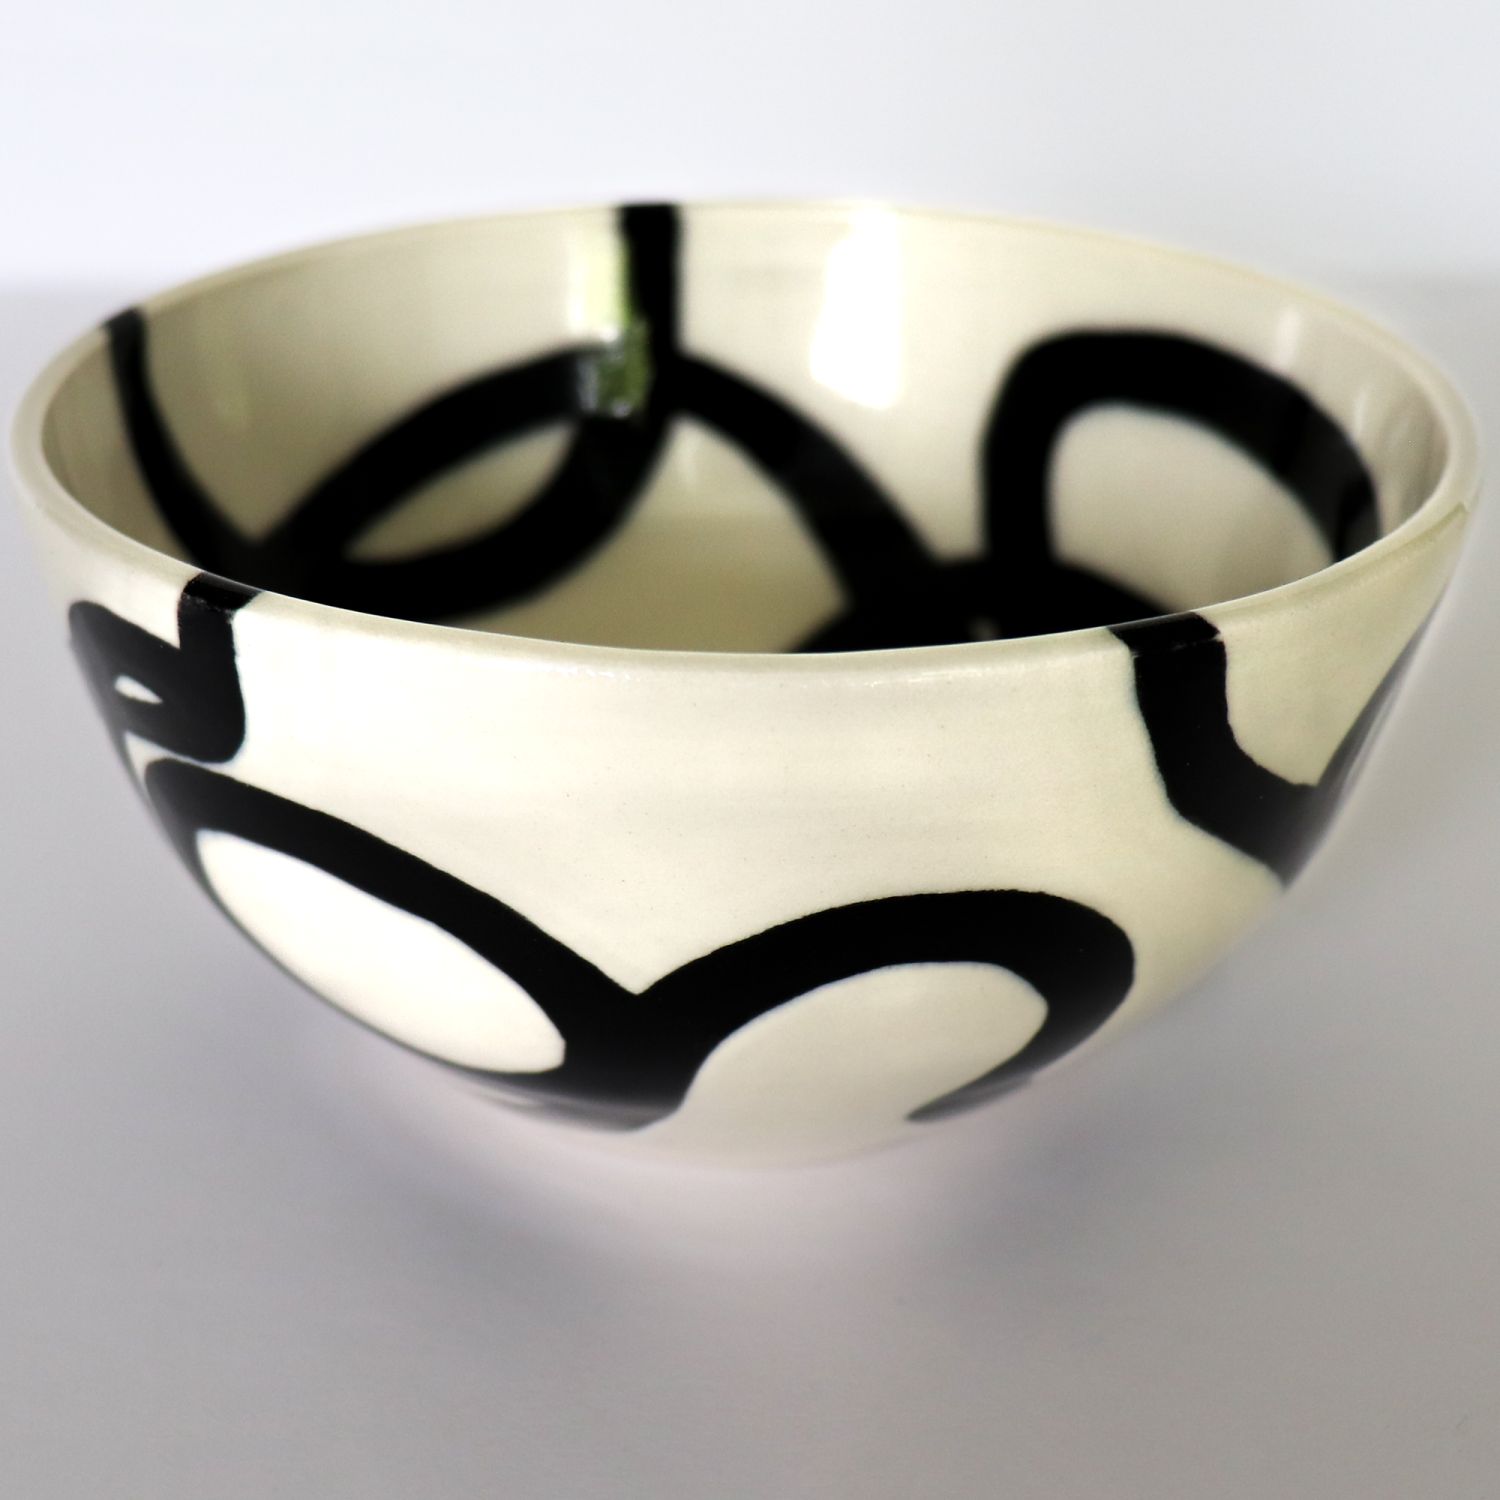 Alana Marcoccia: Interconnected Bowl – Small Product Image 1 of 5